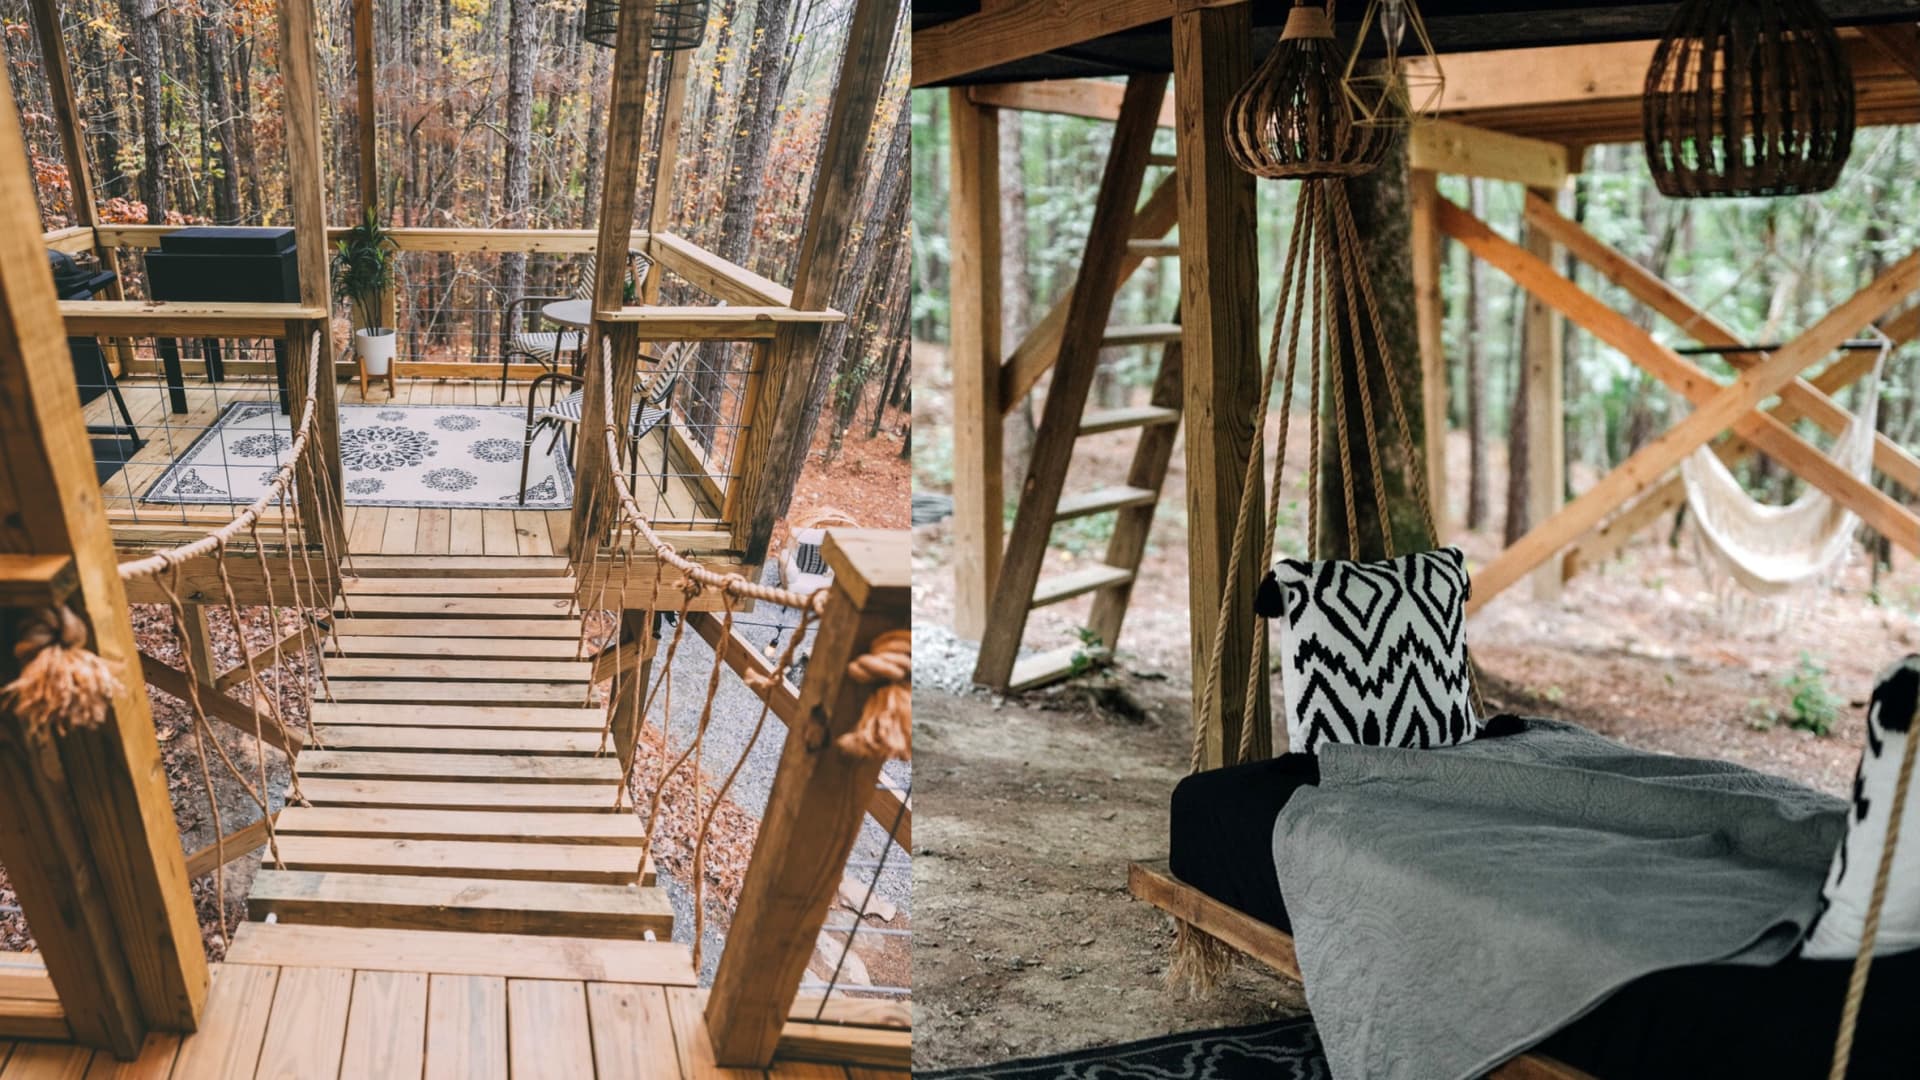 Though it doesn't allow kids, the Wanderlust Treehouse incorporates imaginative features into its design.